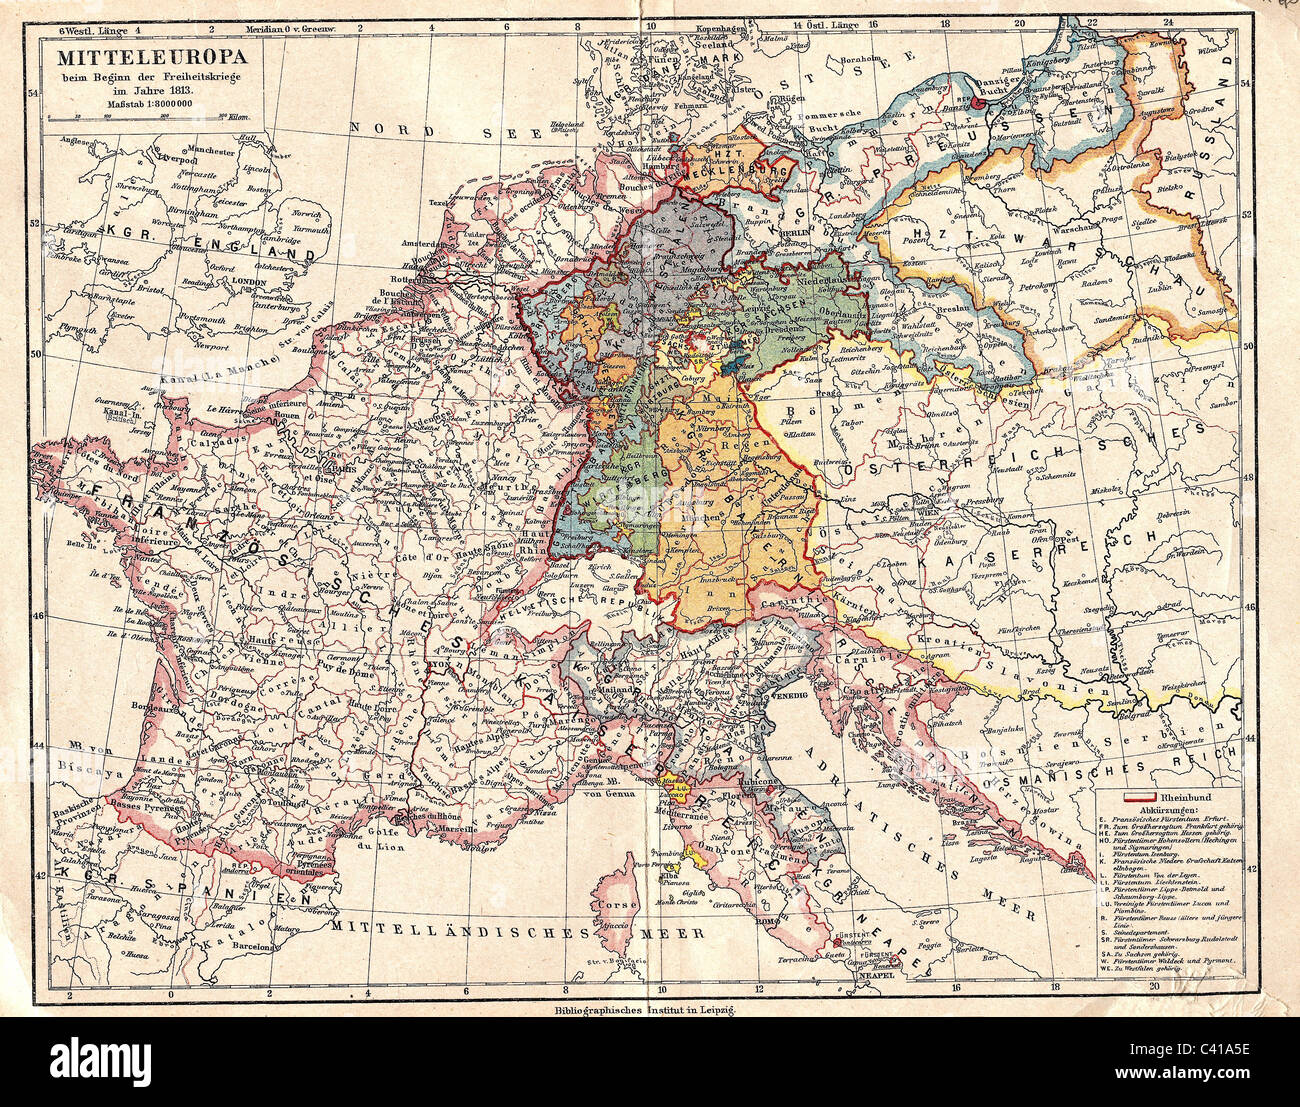 cartography, maps, map of Central Europe at the beginning of the War of the Sixth Coalition in 1813 , war of liberation, Napoleonic Wars, 19th century, historic, historical, Europe, map, maps, France, Germany, Prussia, Austria, Poland, Russia, Italy, England, Spain, Confederation of the Rhine, Additional-Rights-Clearences-Not Available Stock Photo